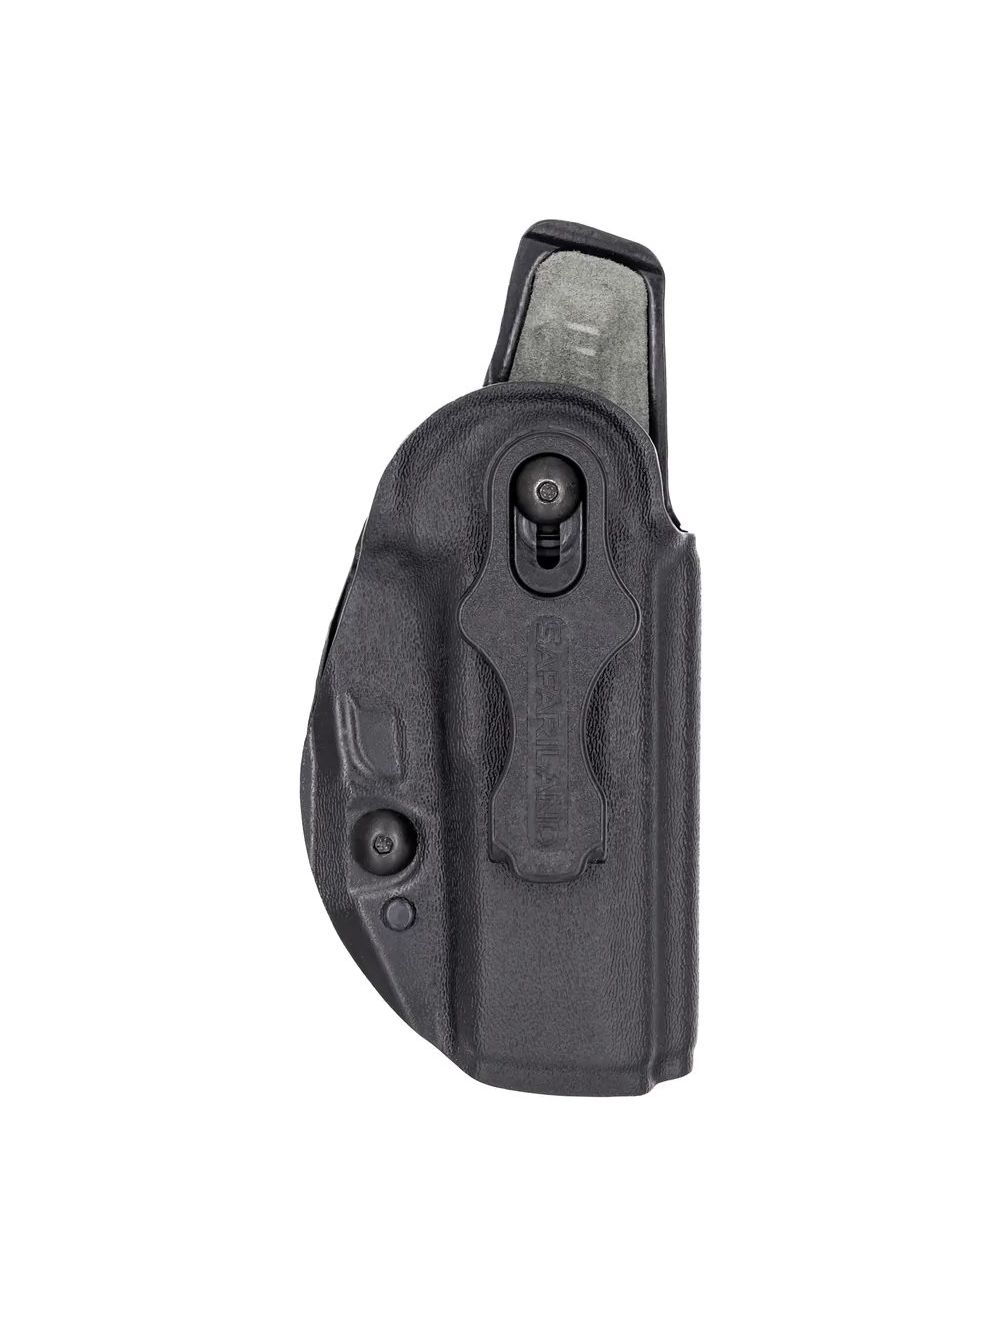 Species IWB Holster for Sig Sauer P365